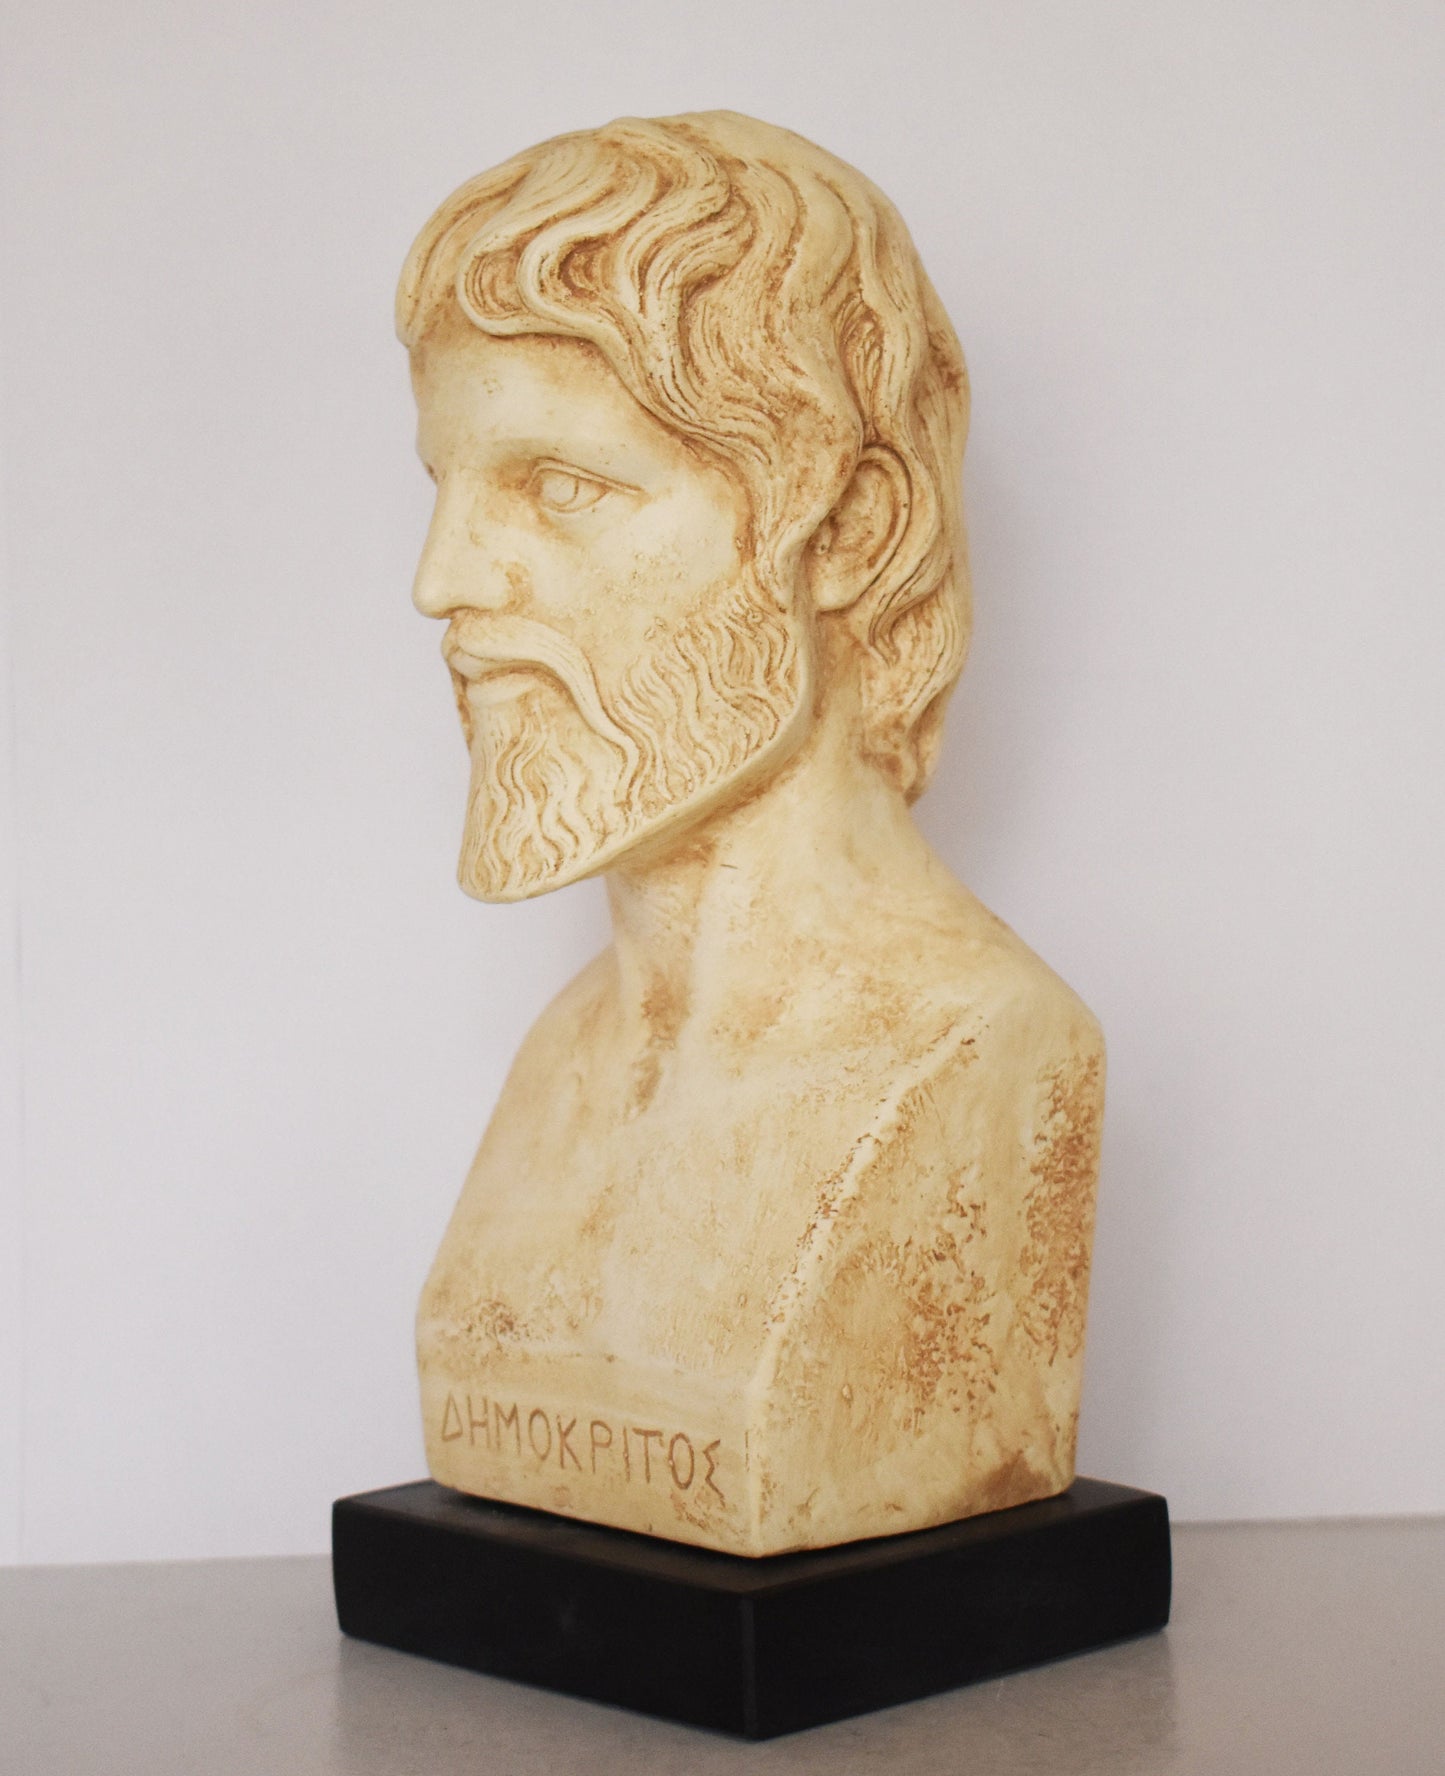 Democritus - 460-370 BC - Ancient Greek Philosopher - The Atomic Theory of the Universe - Marble Base - Museum Reproduction - Head Bust